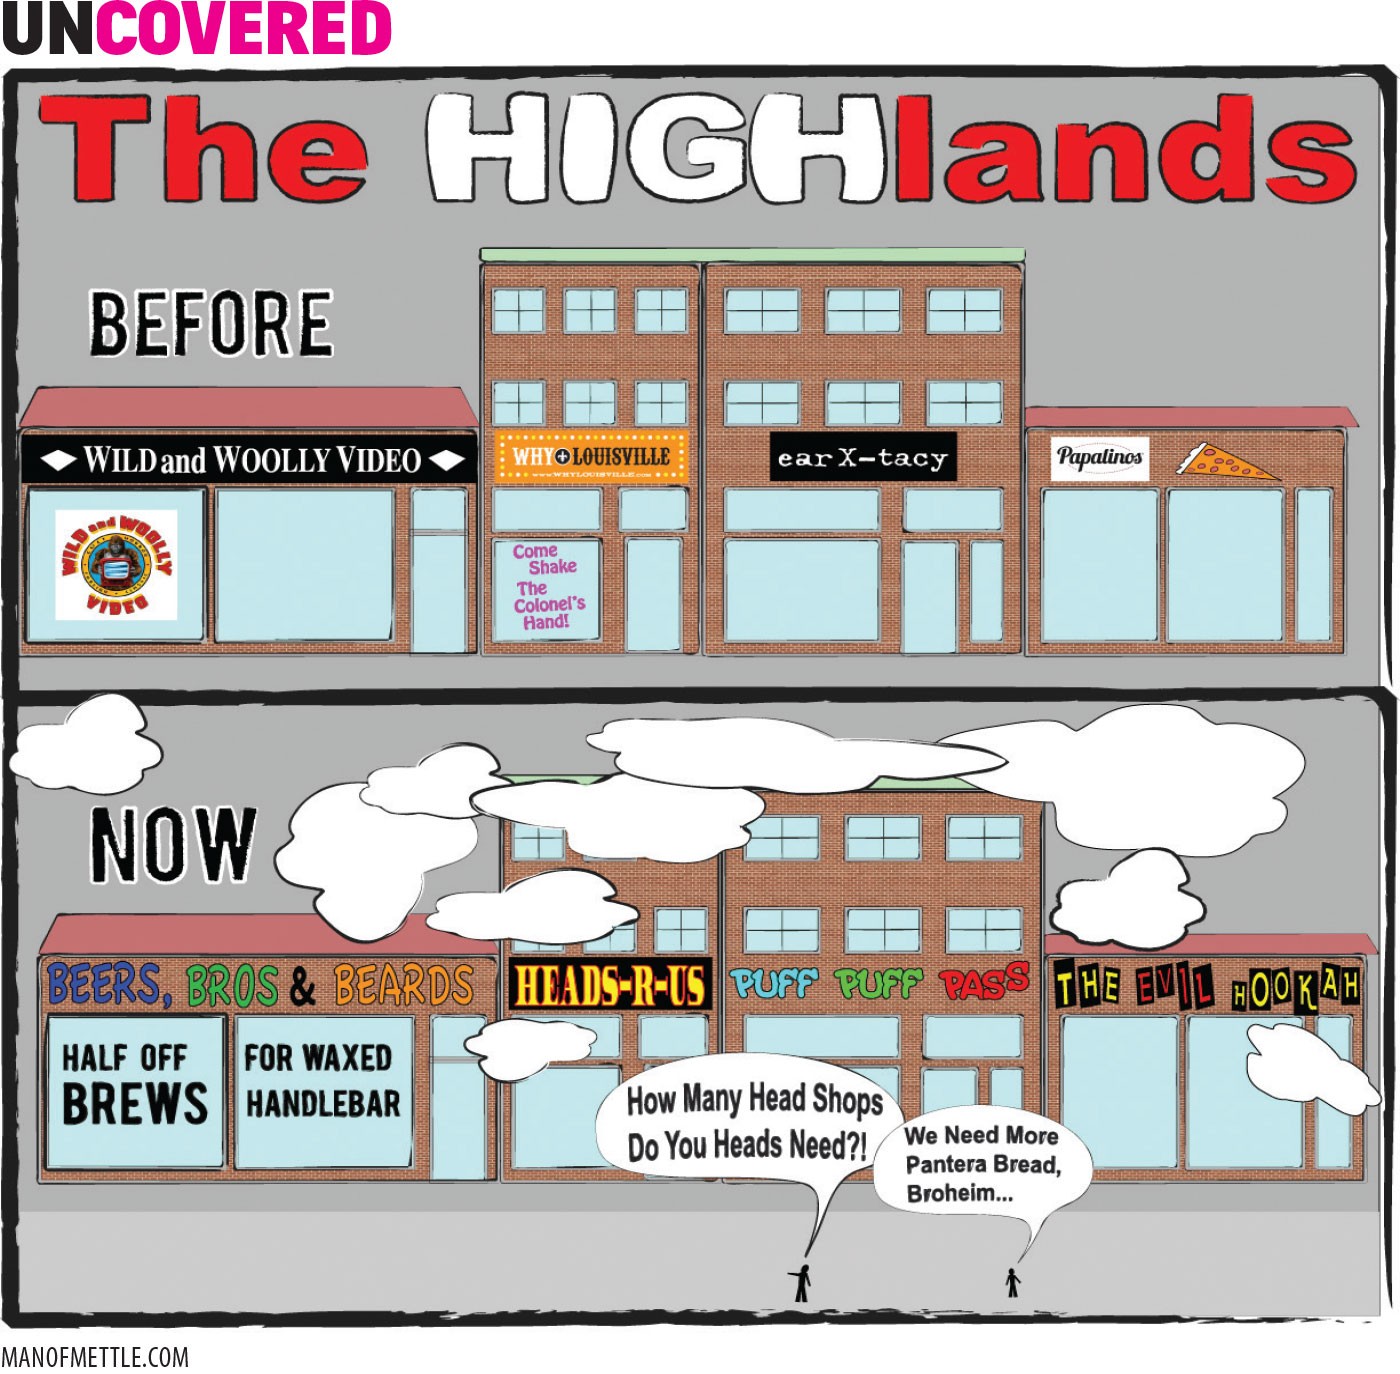 The Highlands, Then and Now